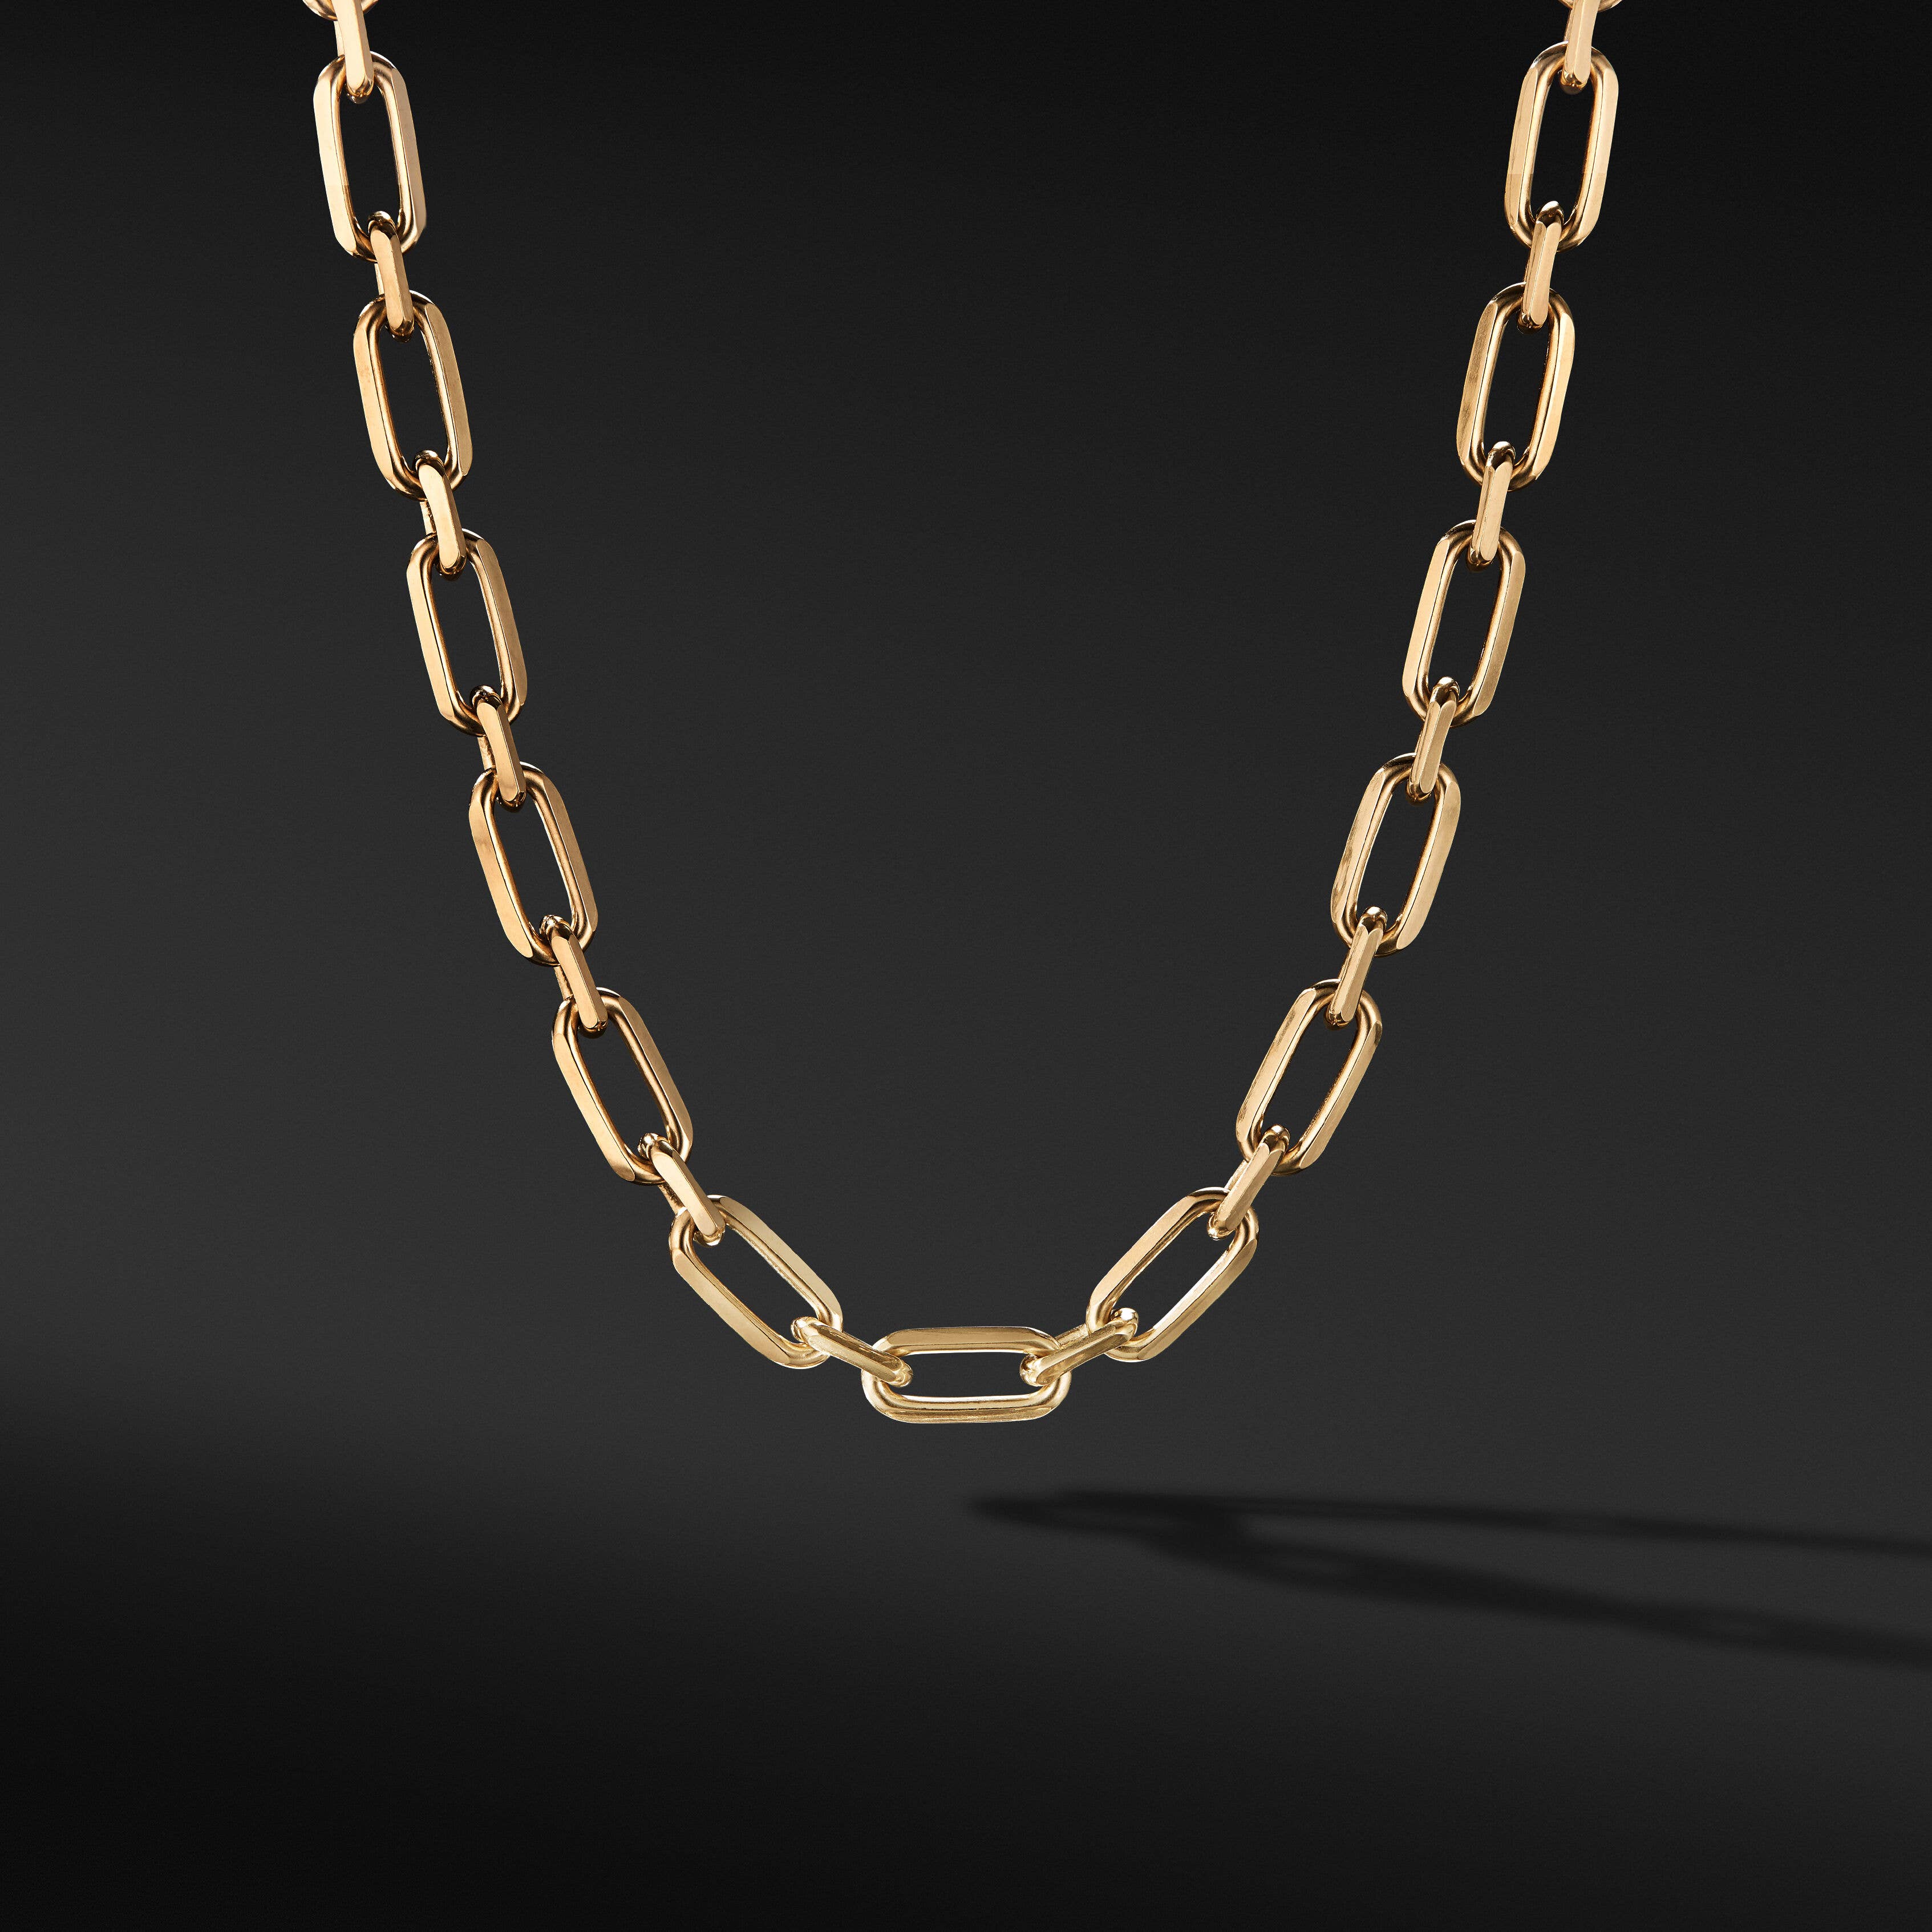 Elongated Open Chain Link Necklace in 18K Yellow Gold